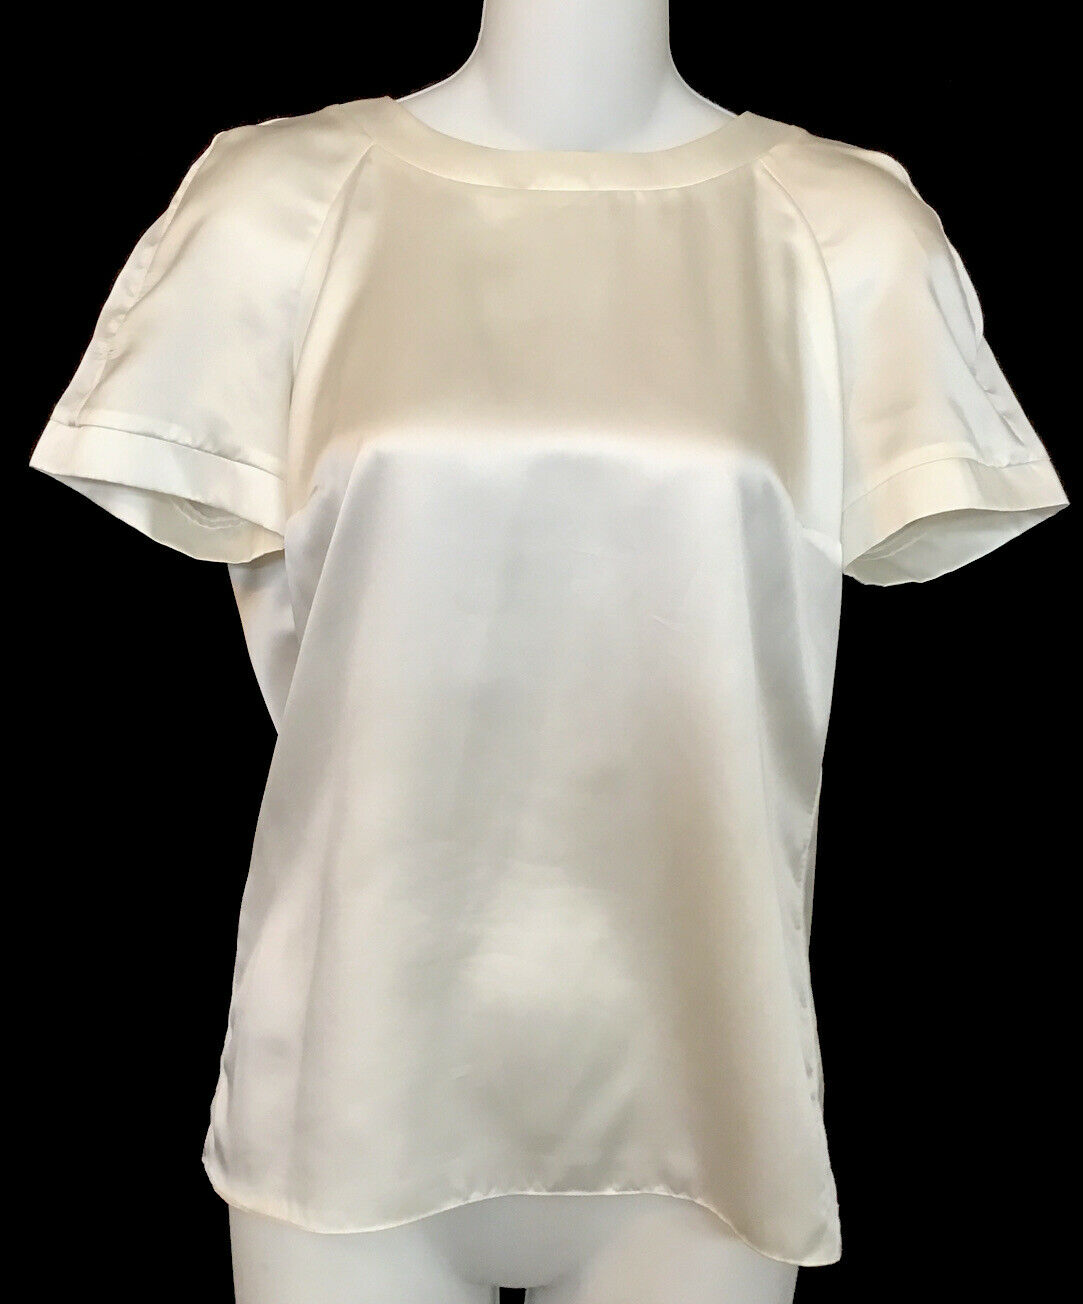 Chanel polyester blouse white short-sleeve preowned for sale on eBay, 2021 (Photo courtesy vegas_fashionista via eBay) Posted for media use 